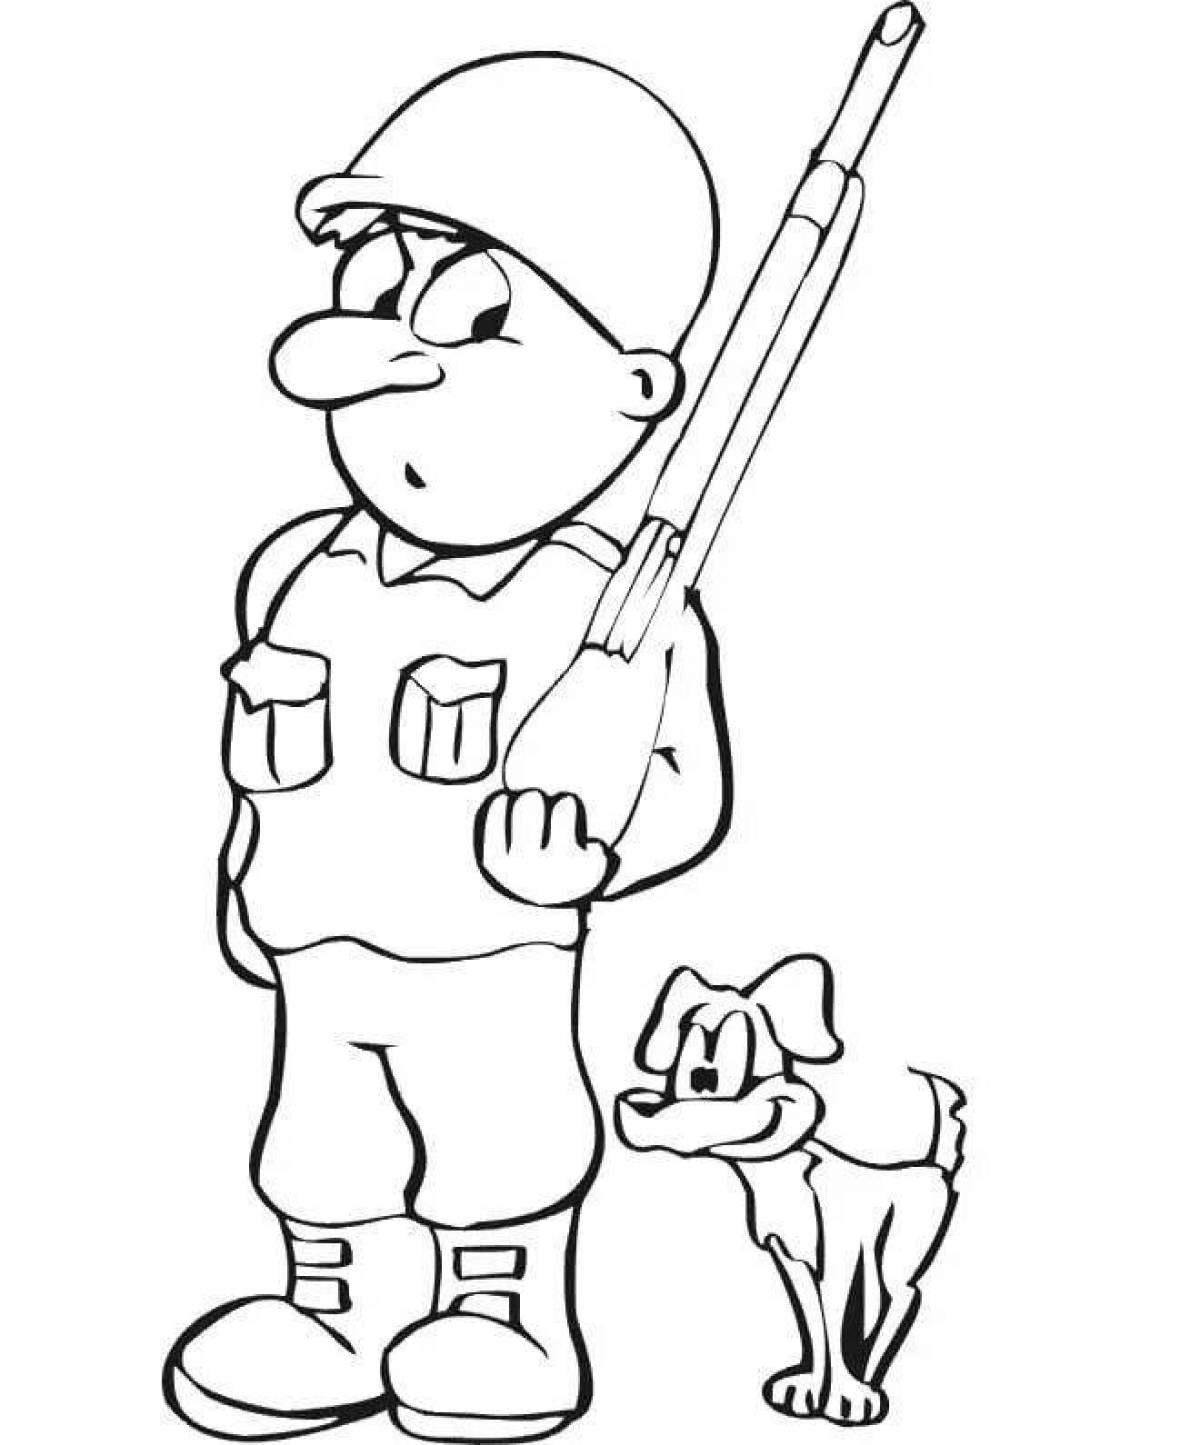 Fearless soldier with dog coloring page